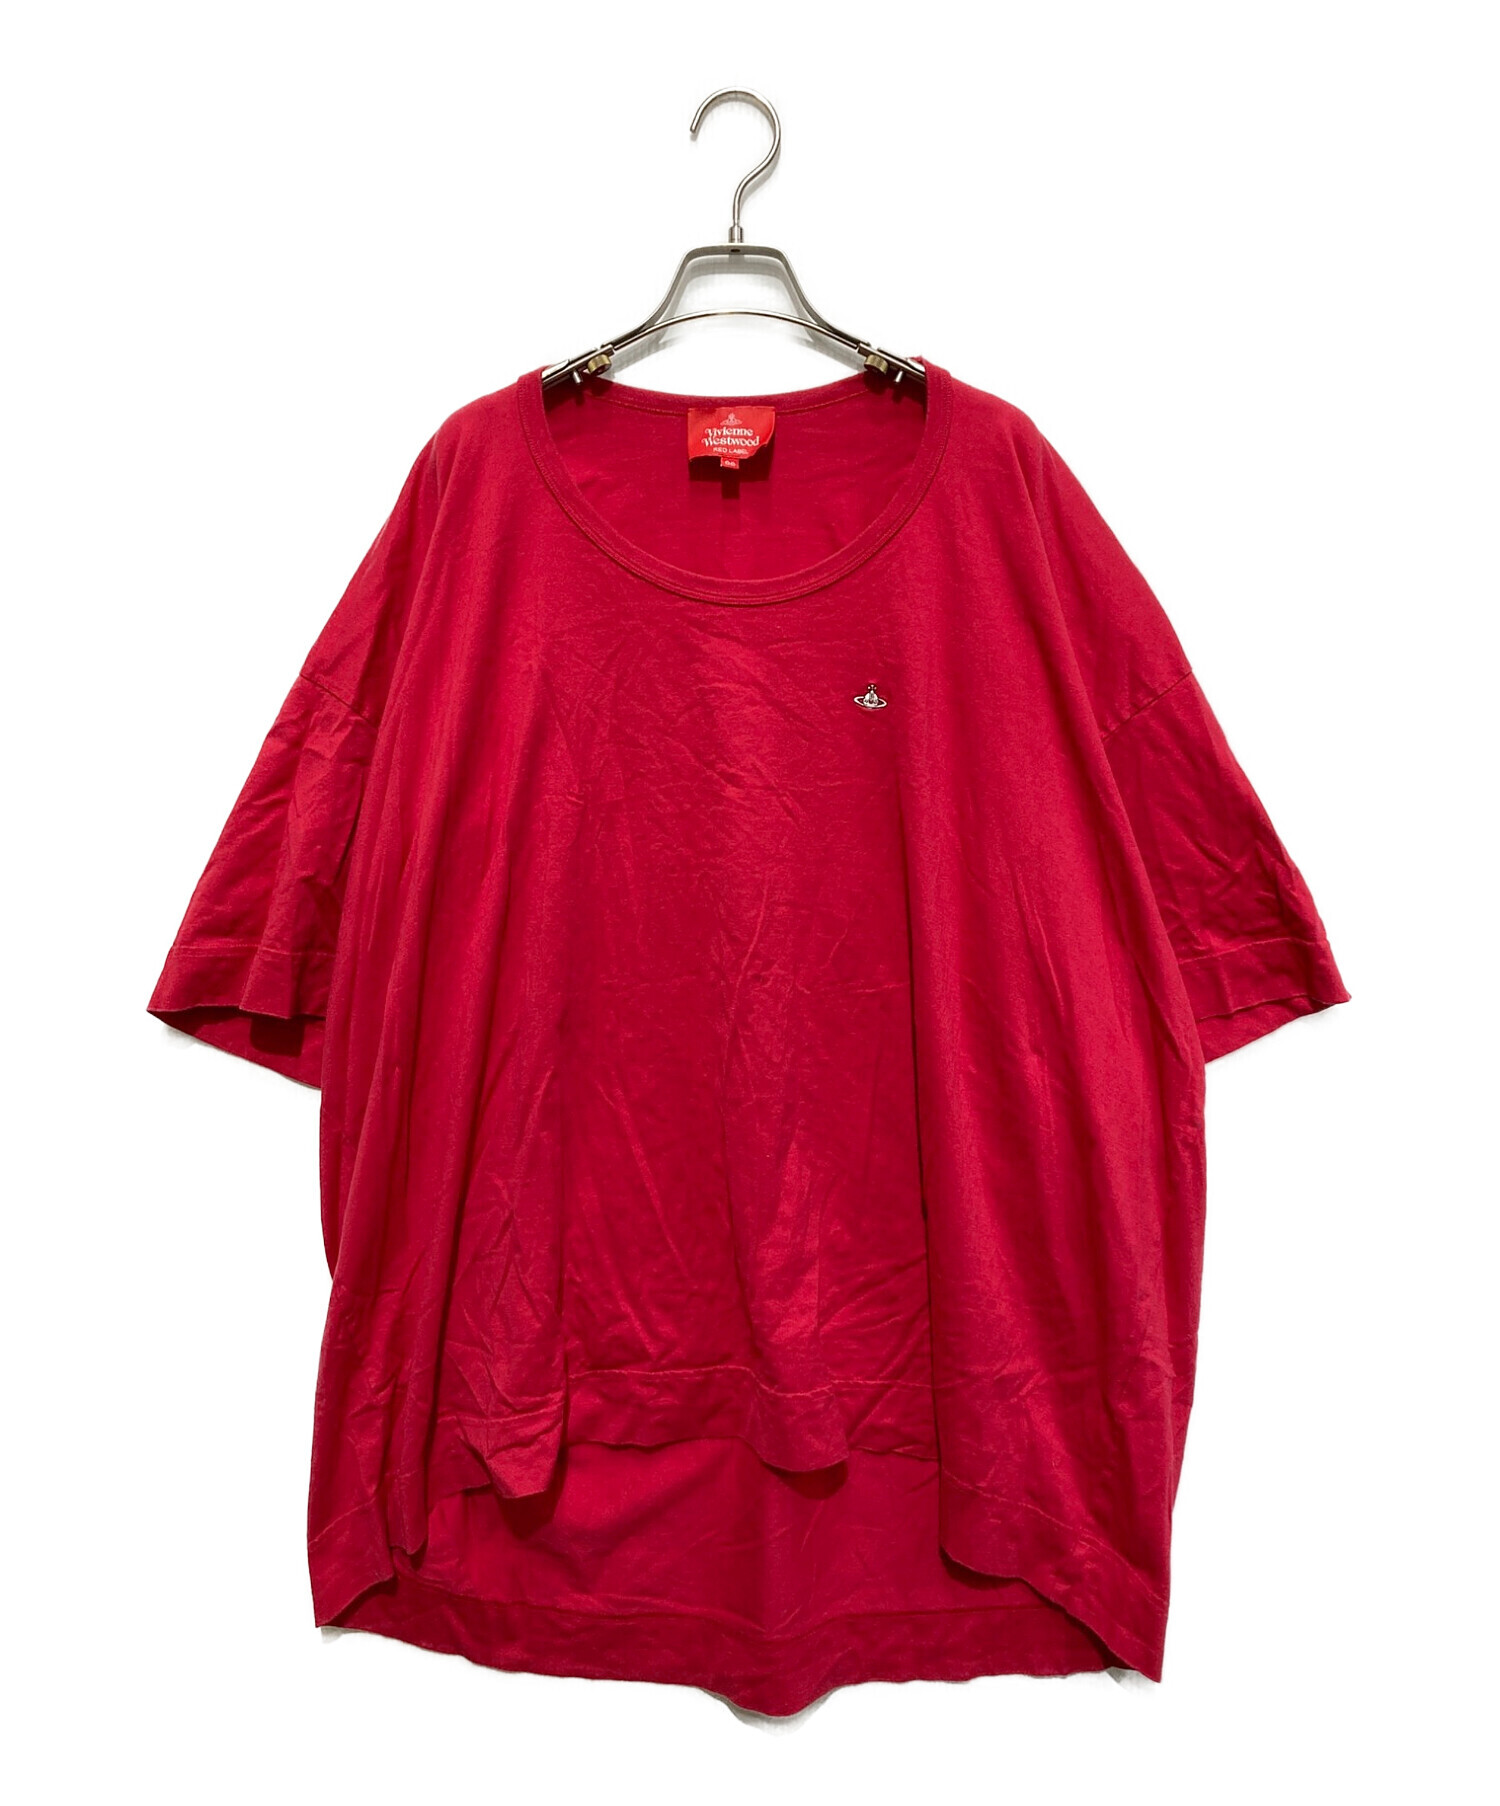 Vivienne Westwood RED LABEL Tシャツ・カットソー 【古着】-